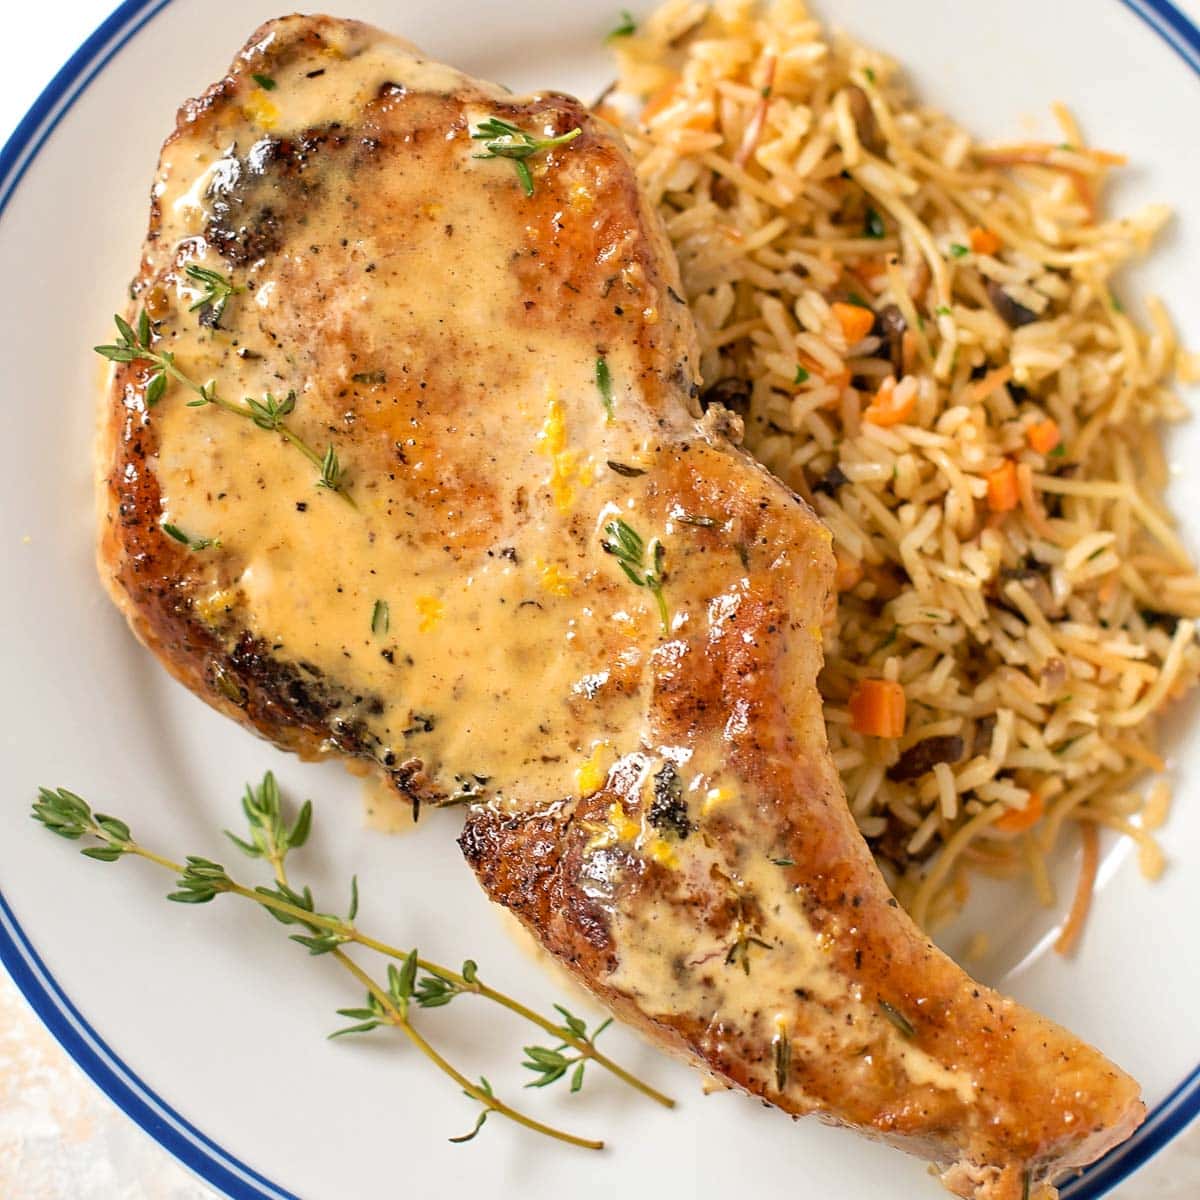 Fall dinner ideas - plate of smothered pork chops with rice.